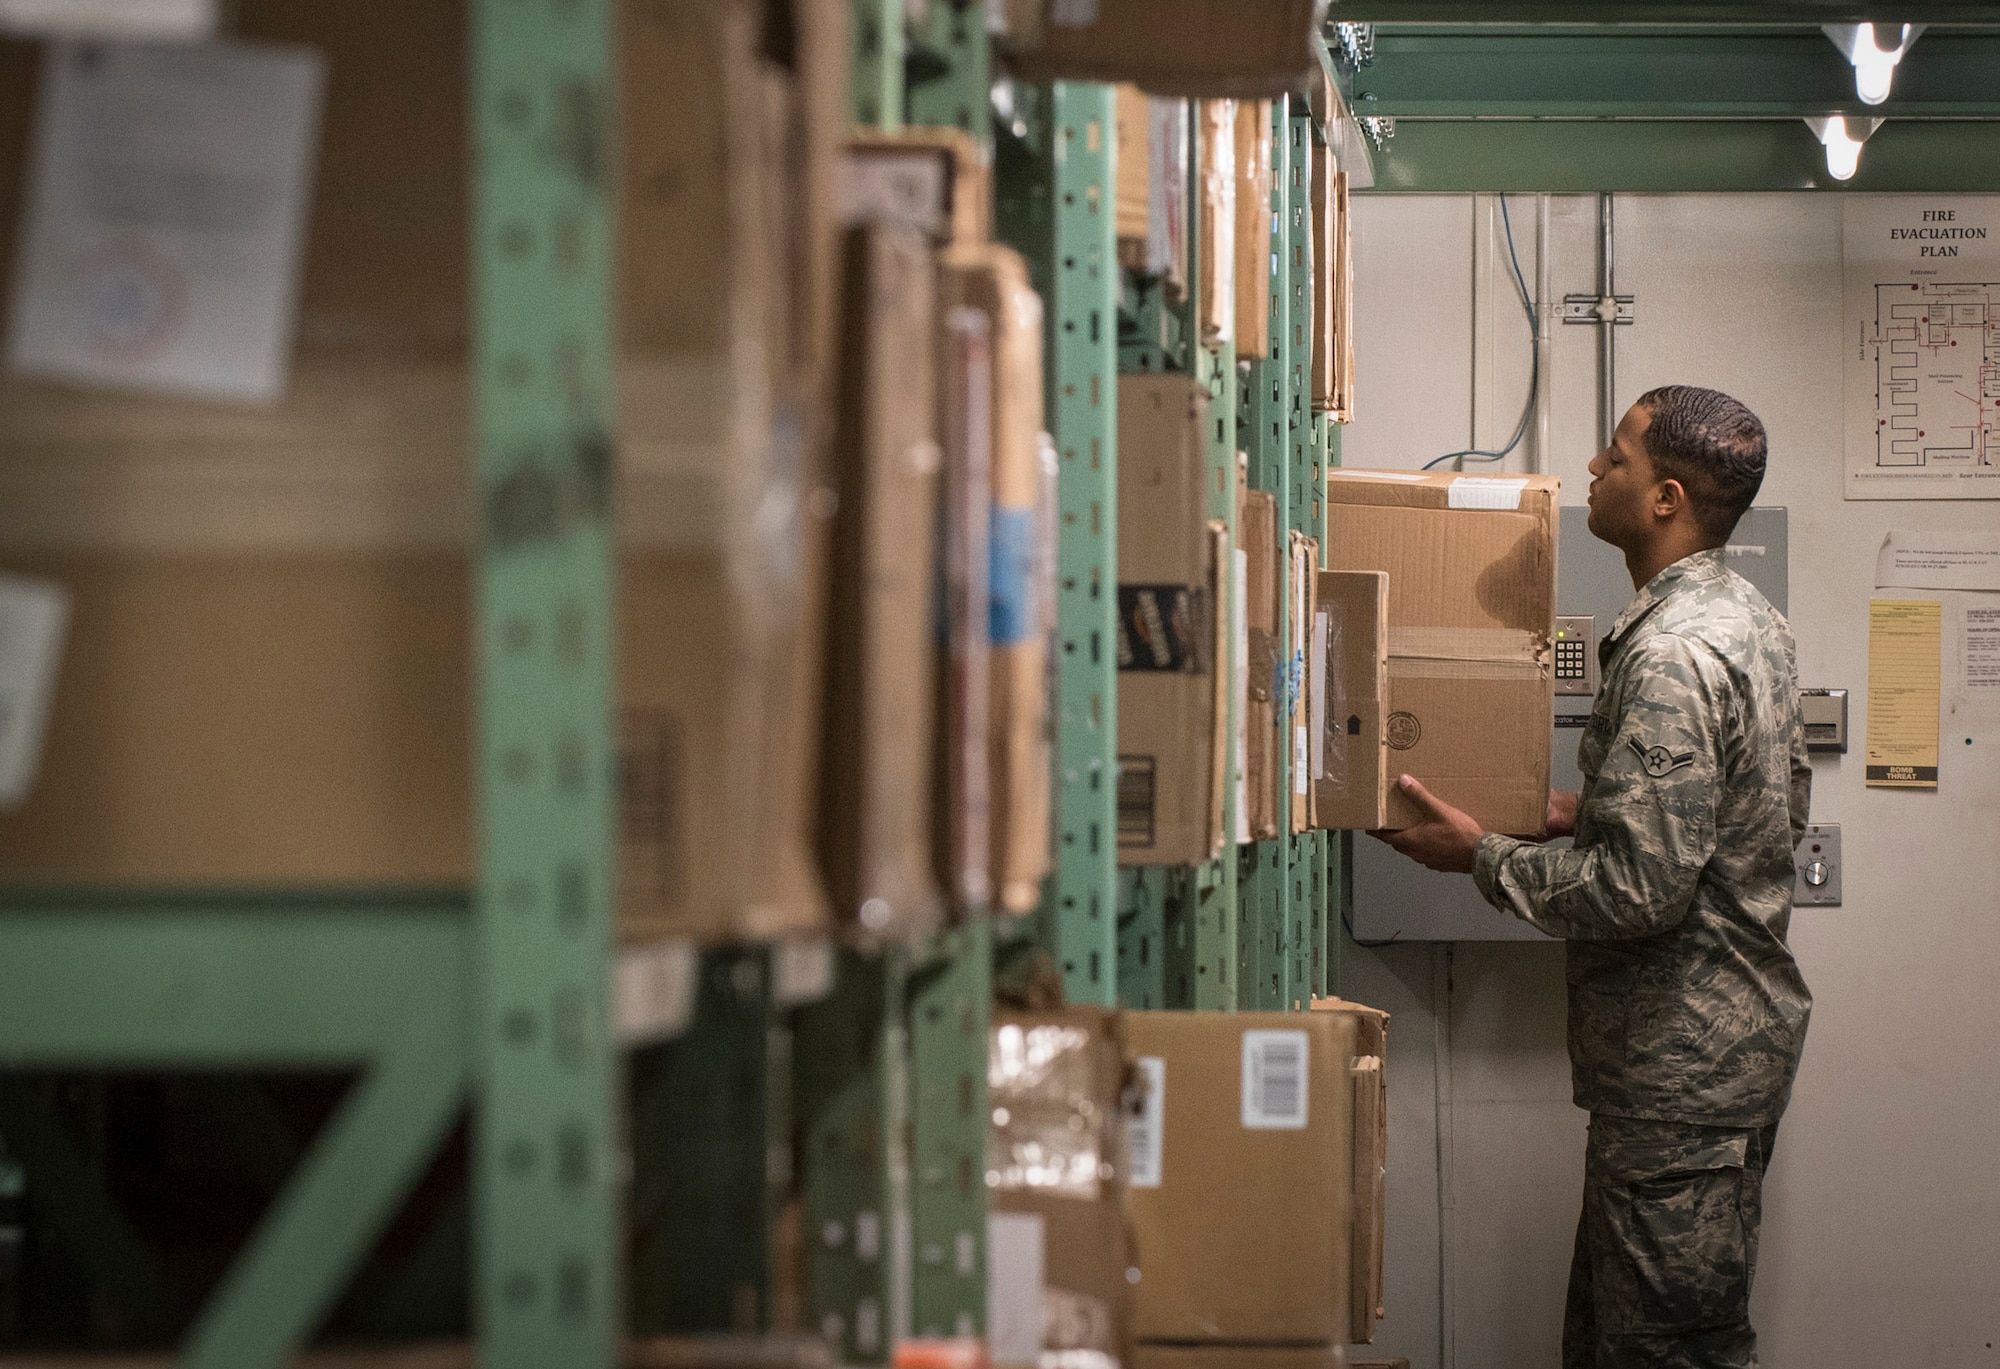 U.S. Air Force Airman Timothy Houston, a 35th Communications Squadron postal clerk, grabs a package from a shelf at Misawa Air Base, Japan, Dec. 15, 2016. Although stateside installation post offices are ran by civilian contractors, overseas post offices are powered by selected 35th CS Airmen. Hours of operation are Monday through Friday, 10 a.m. - 6 p.m., Saturday, 10 a.m. - 4 p.m. and Sunday, 1 p.m. - 3 p.m. (U.S. Air Force photo by Airman 1st Class Sadie Colbert)